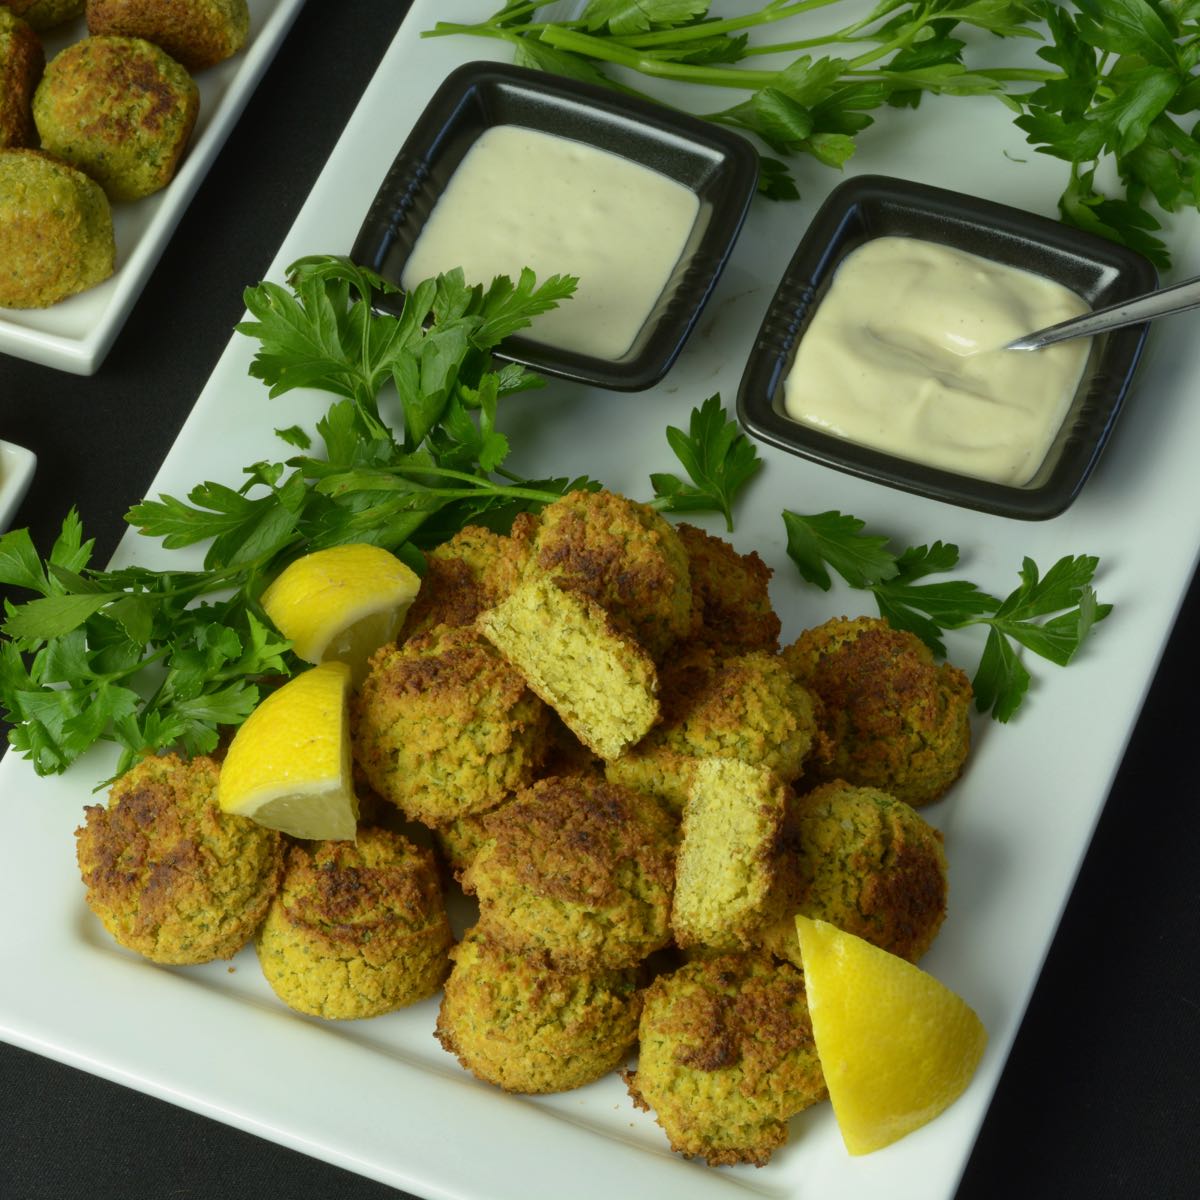 A platter of high fibre Falafel Balls with Tahini Sauce garnished with fresh parsley and lemon wedges.